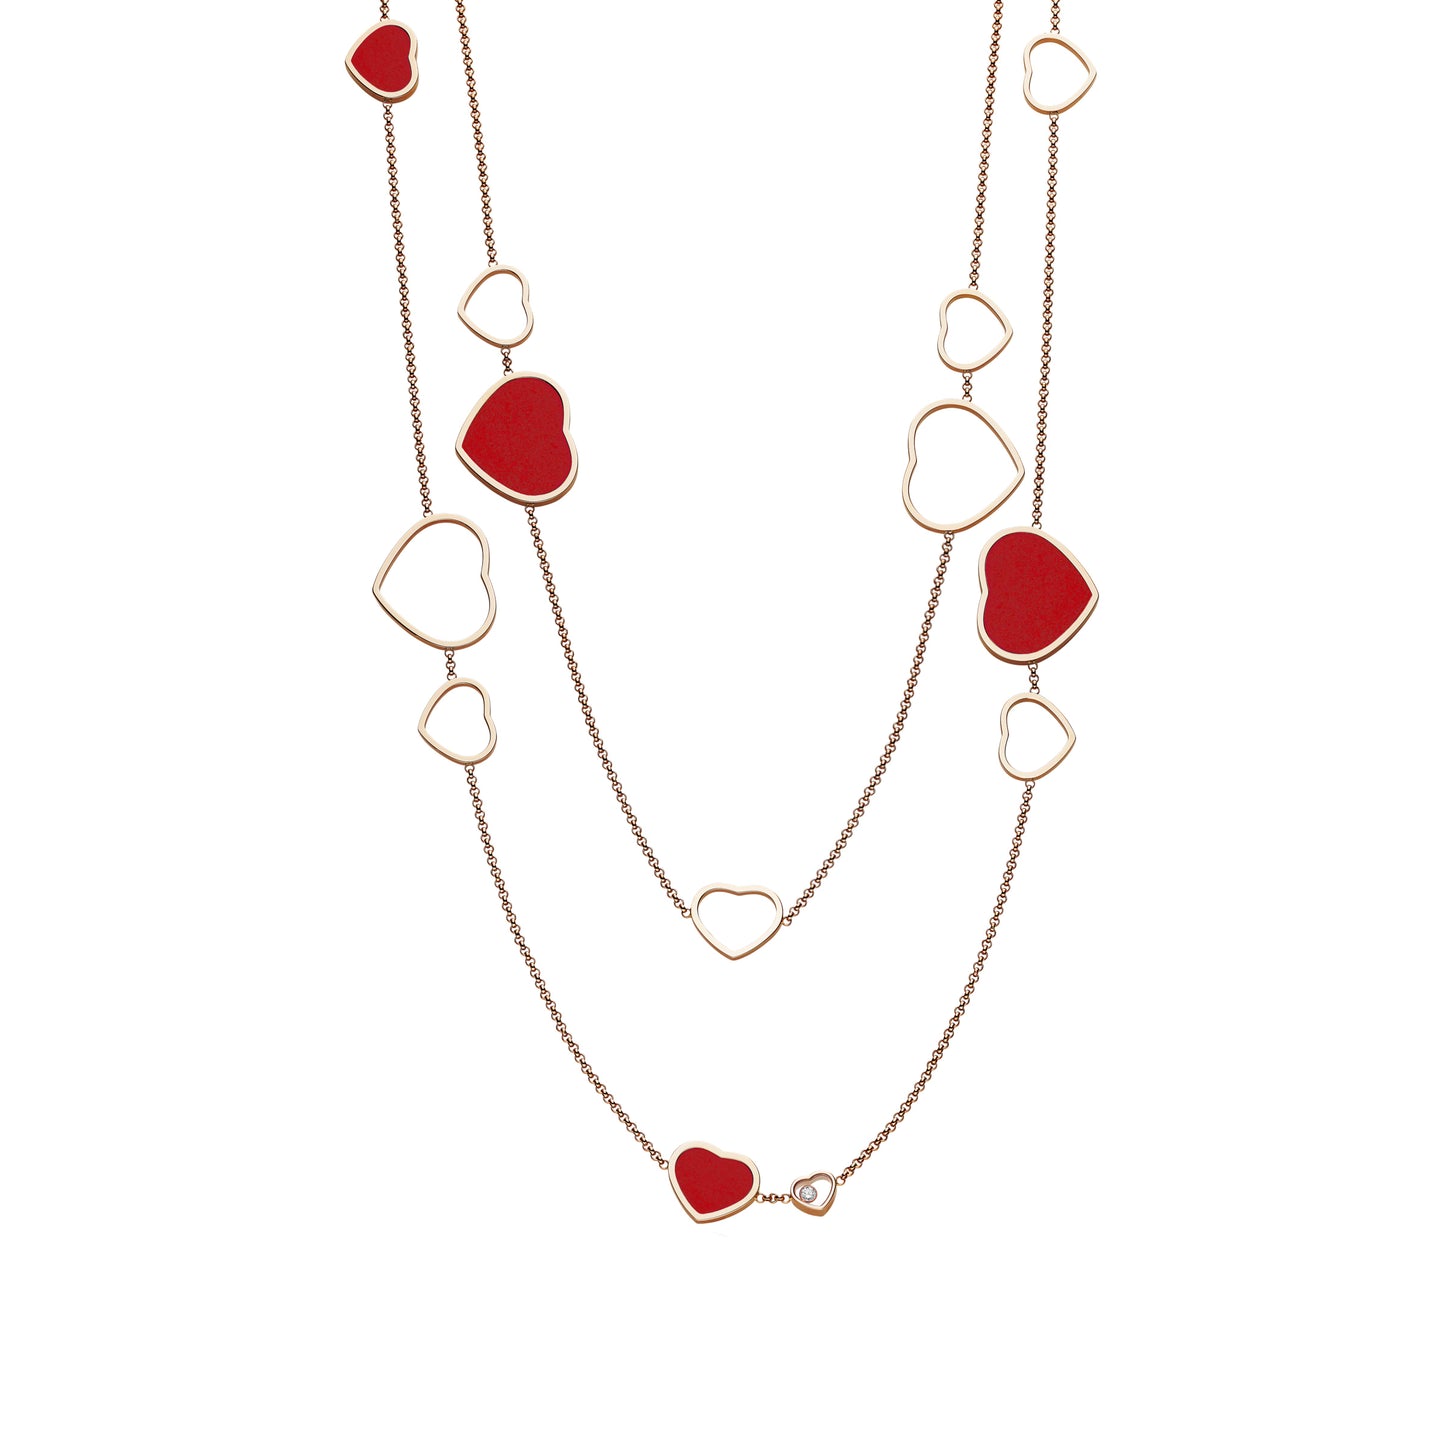 HAPPY HEARTS SAUTOIR NECKLACE, ETHICAL ROSE GOLD, DIAMONDS, RED STONE 817482-5801